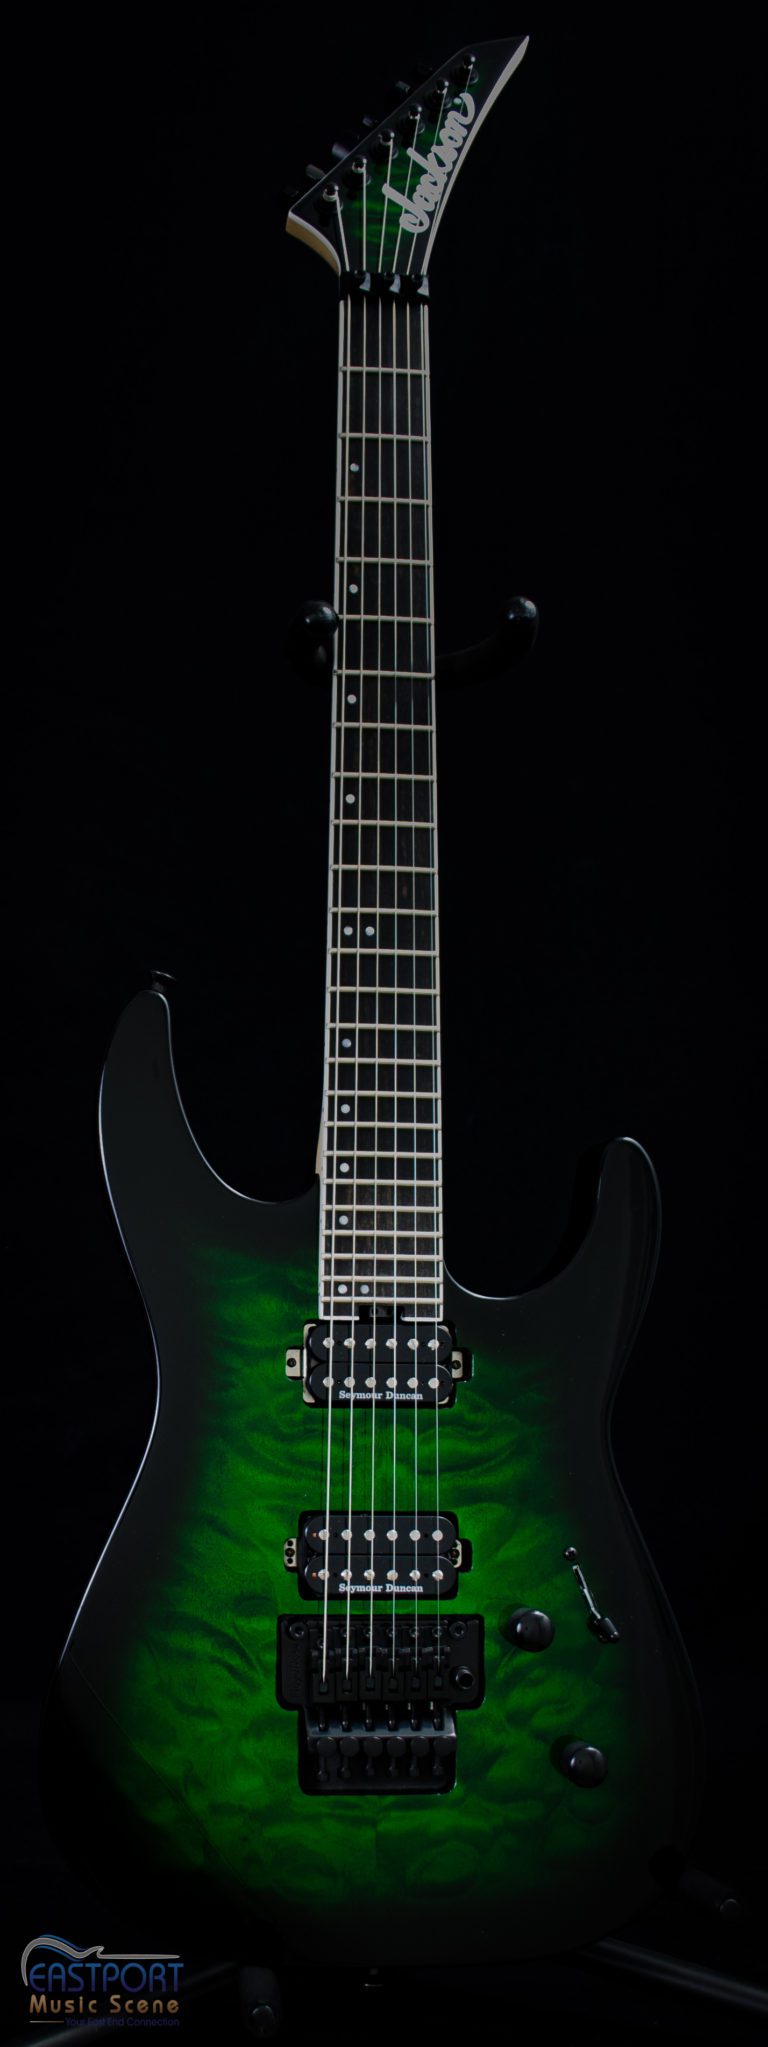 A green electric guitar with black body and neck.